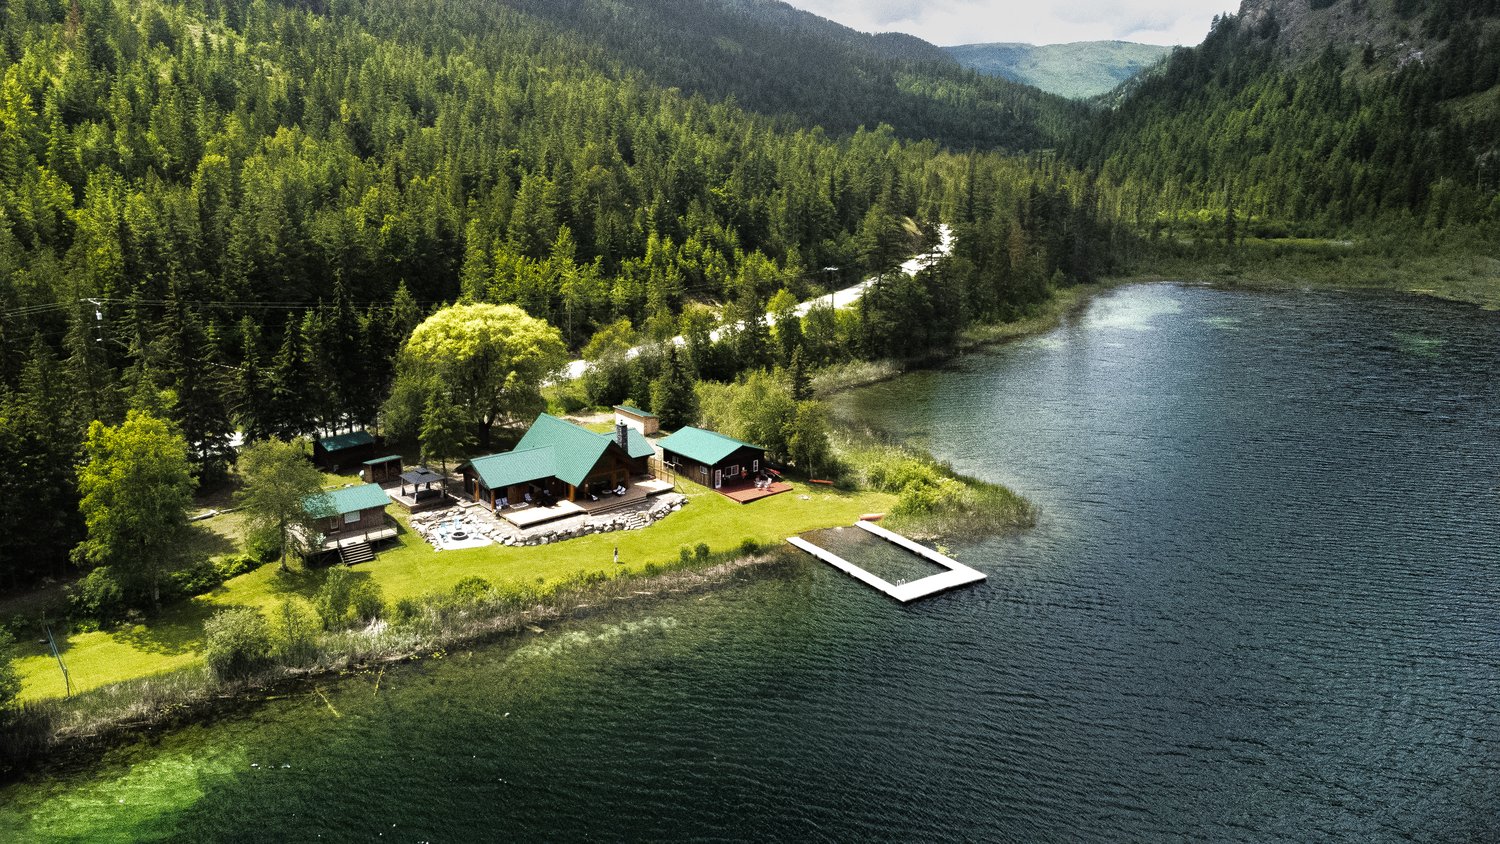 Drone image of a resort on a lake.